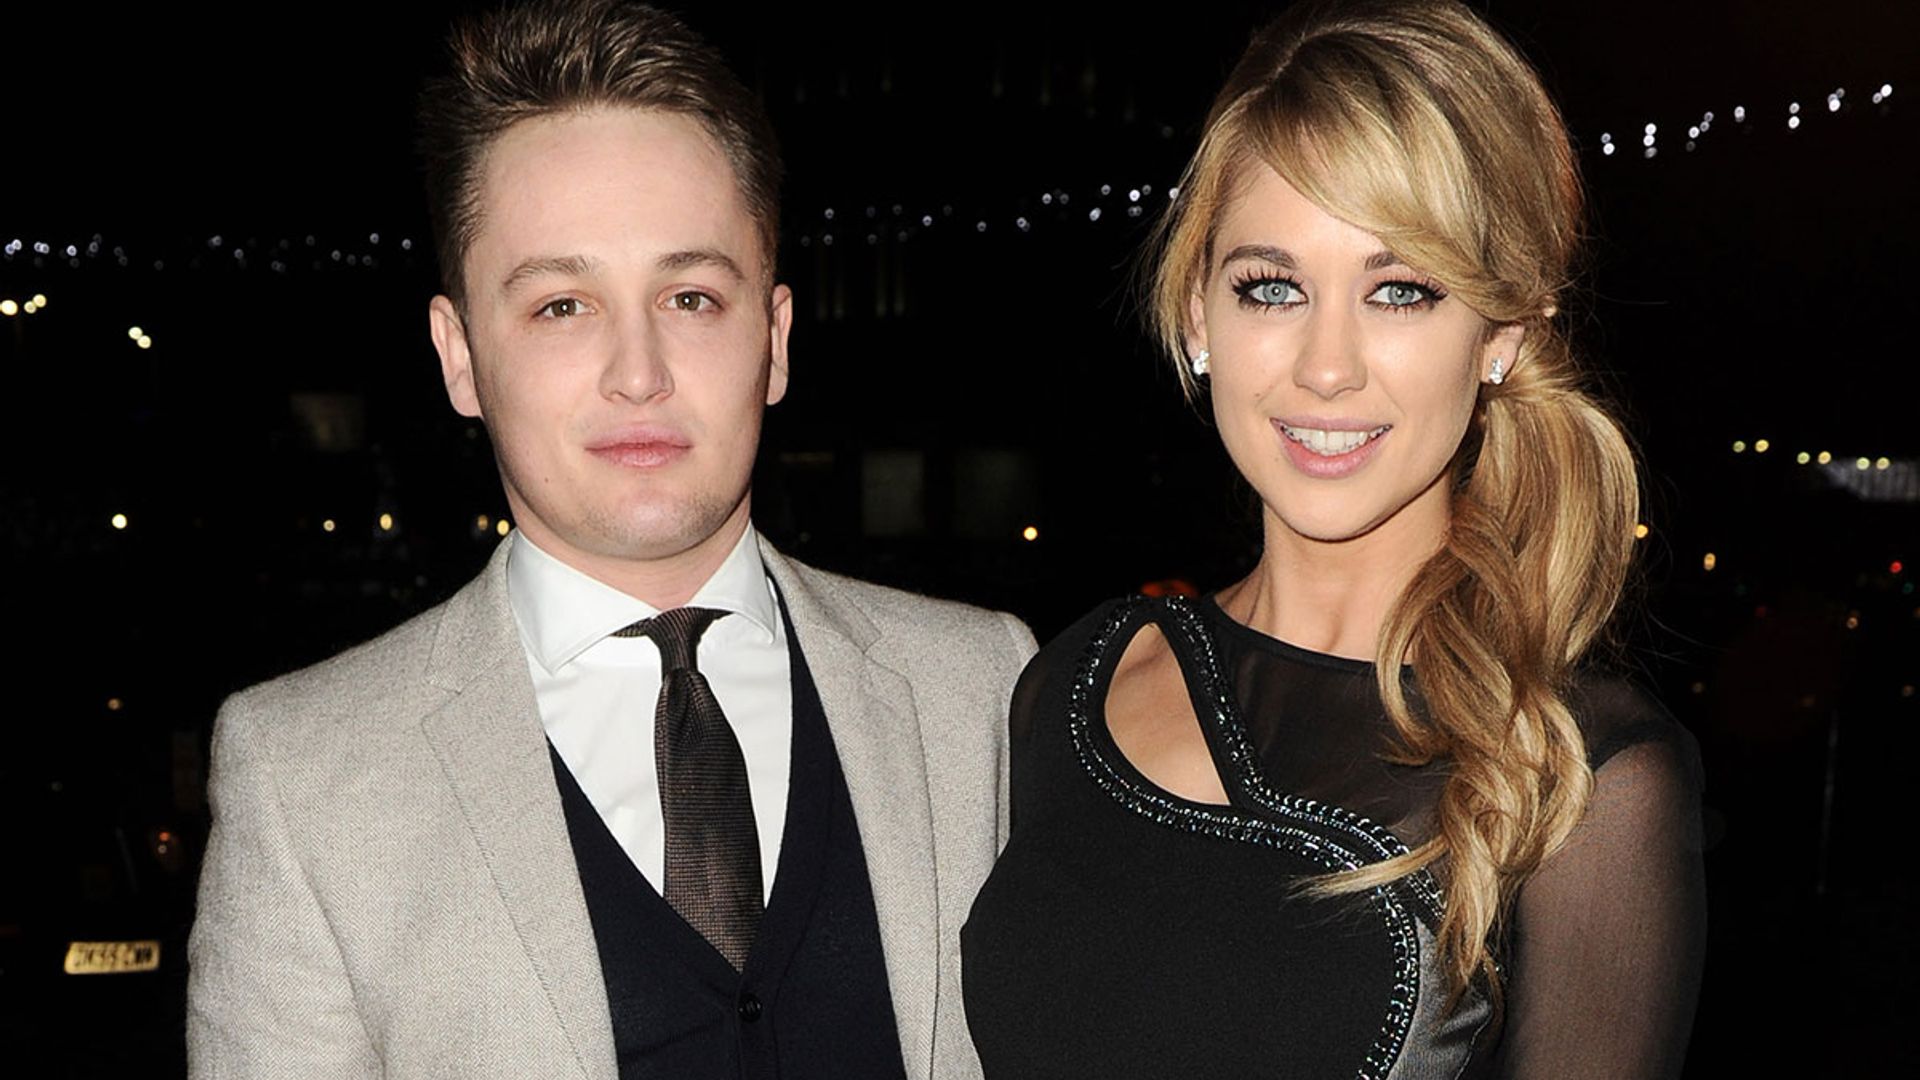 Hollyoaks real-life couple Amanda Clapham and Alfie Brown-Sykes confirm shocking split